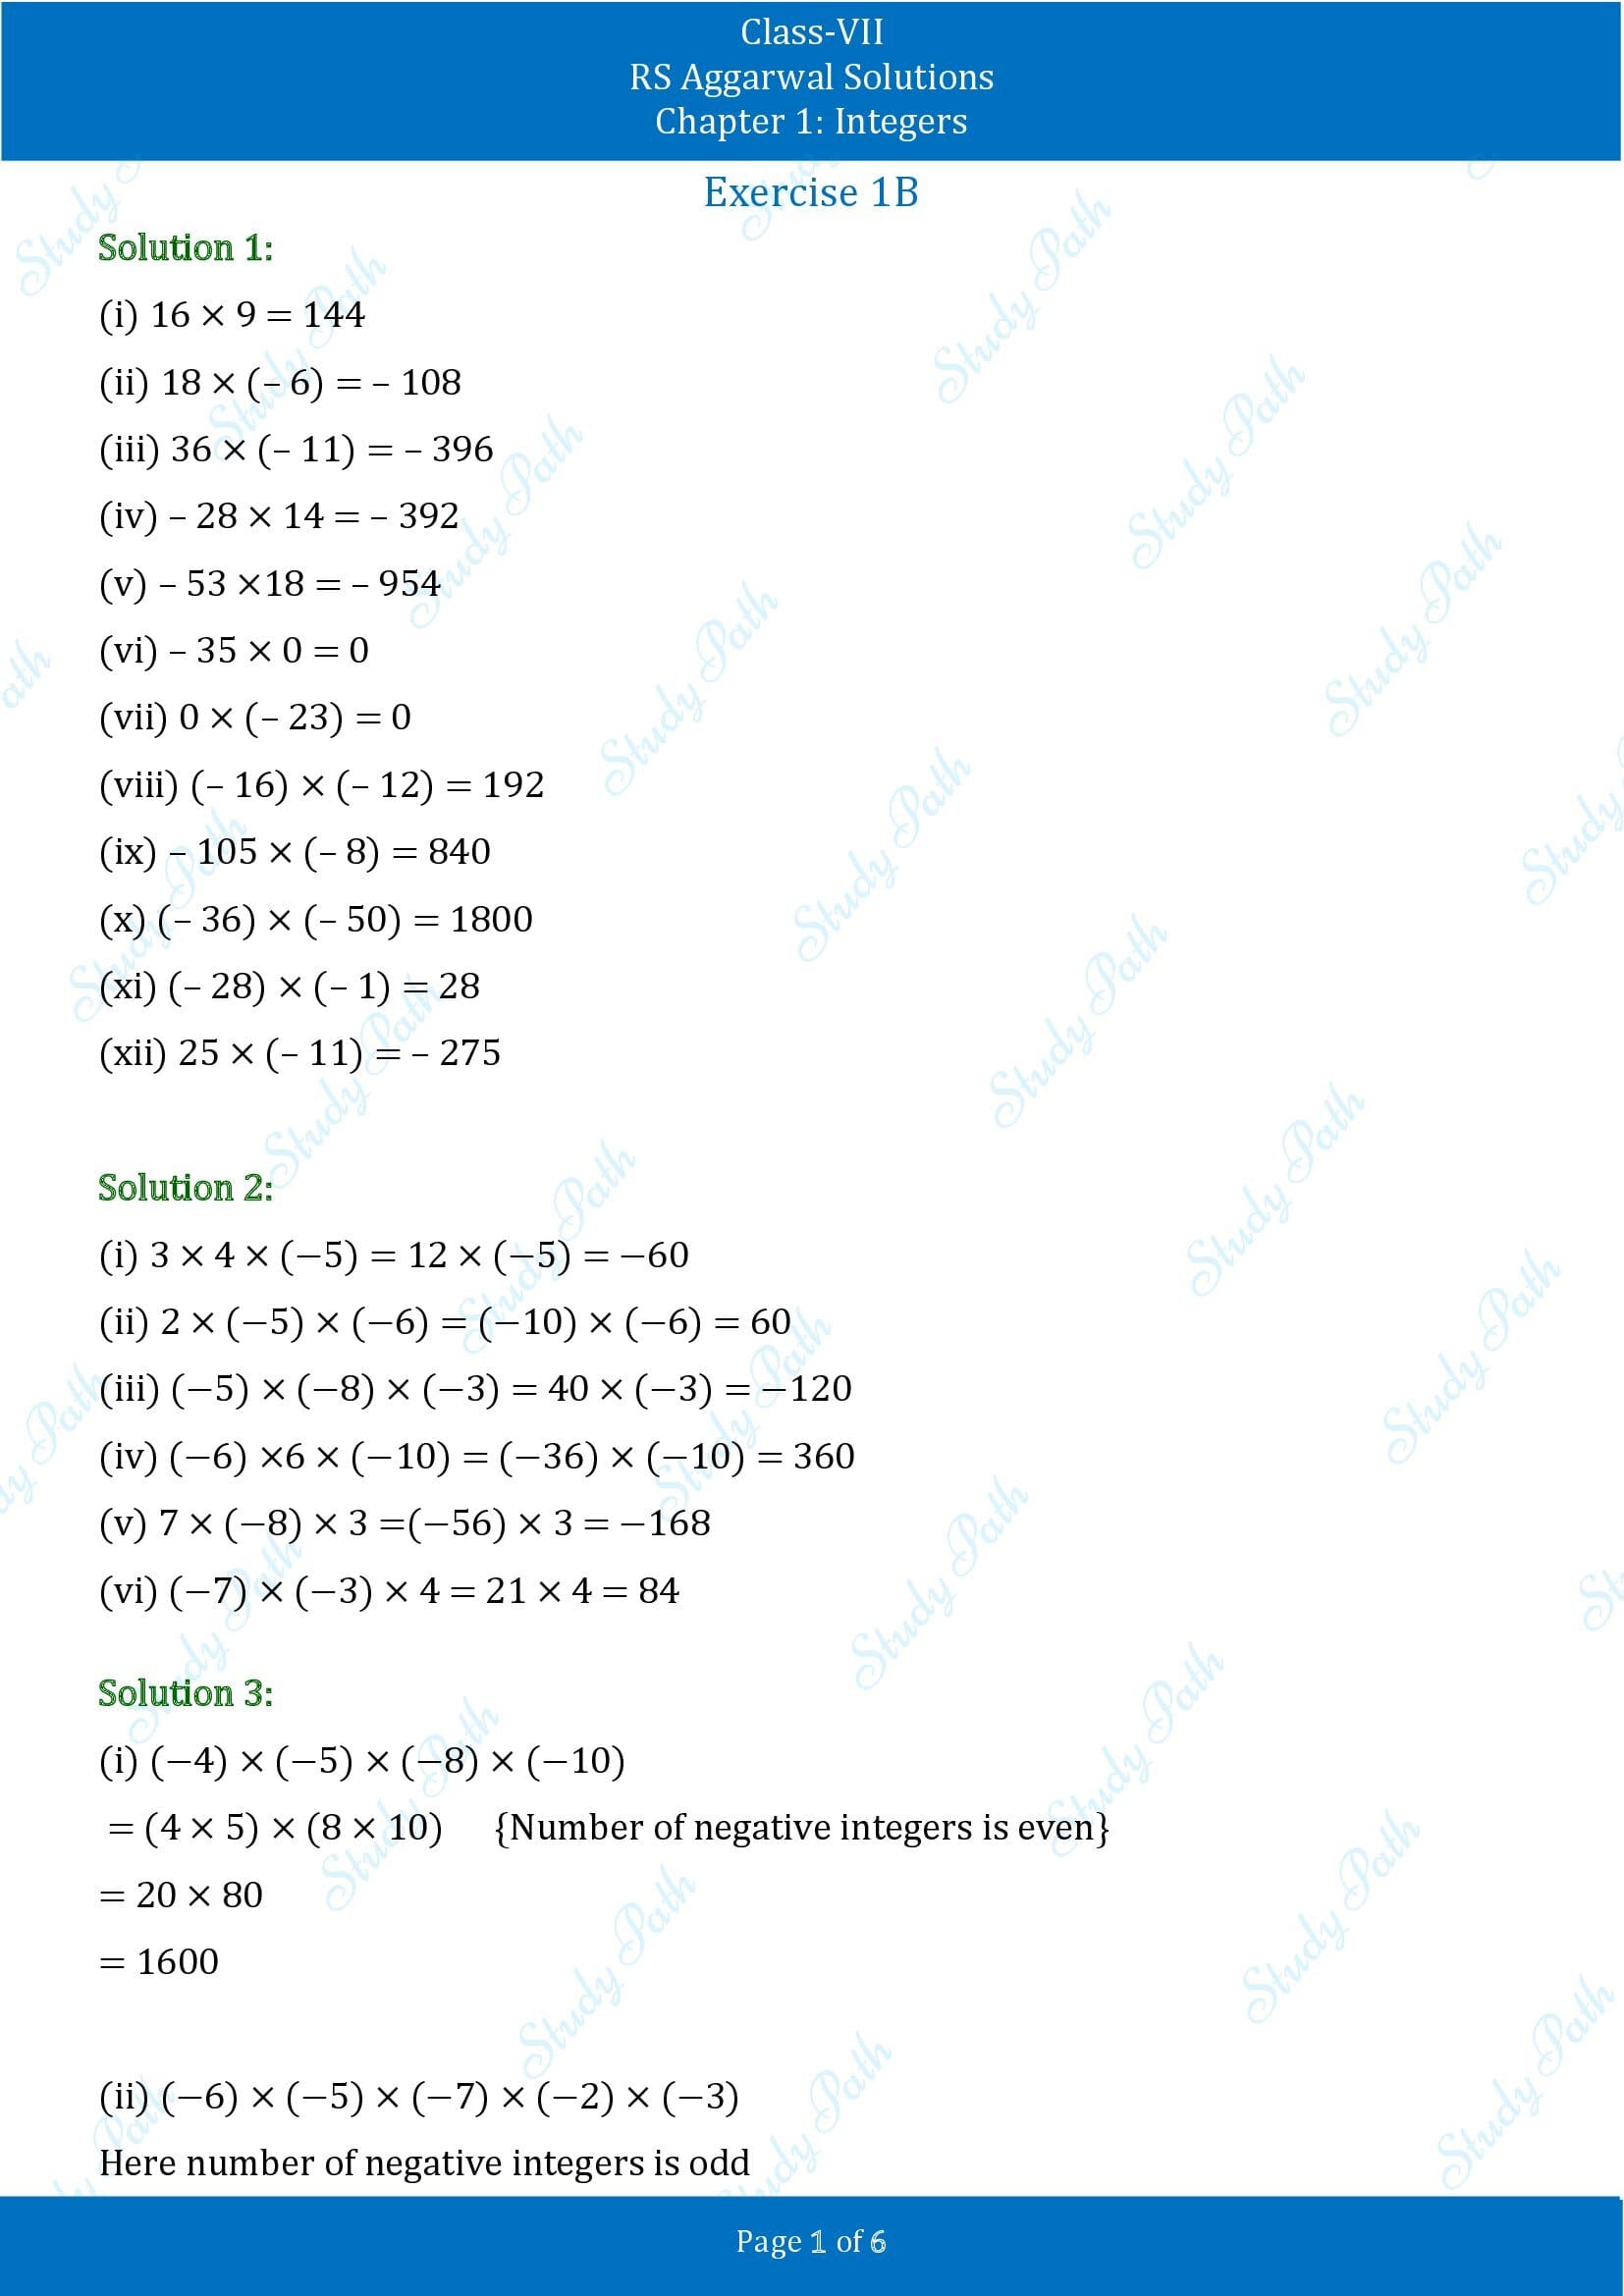 RS Aggarwal Solutions Class 7 Chapter 1 Integers Exercise 1B 00001